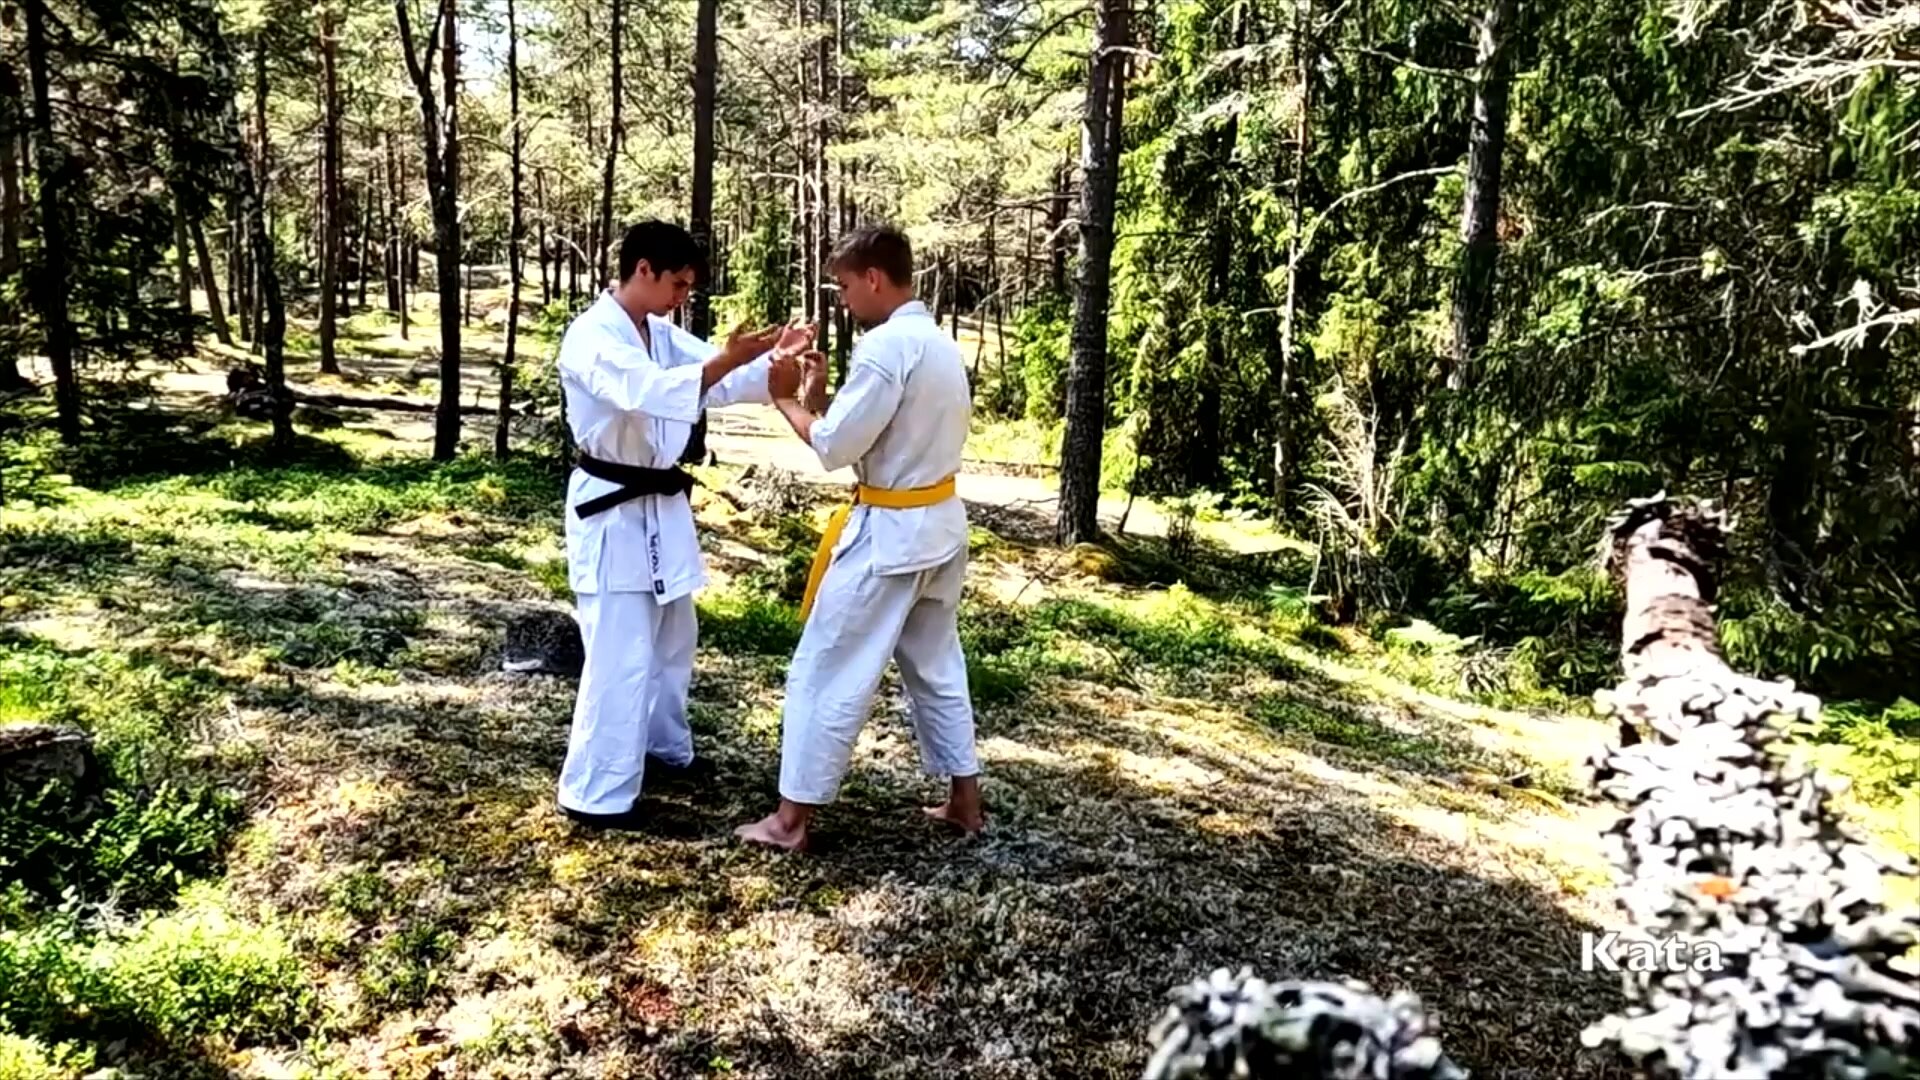 Rugged Forest Karate - ThisVid.com